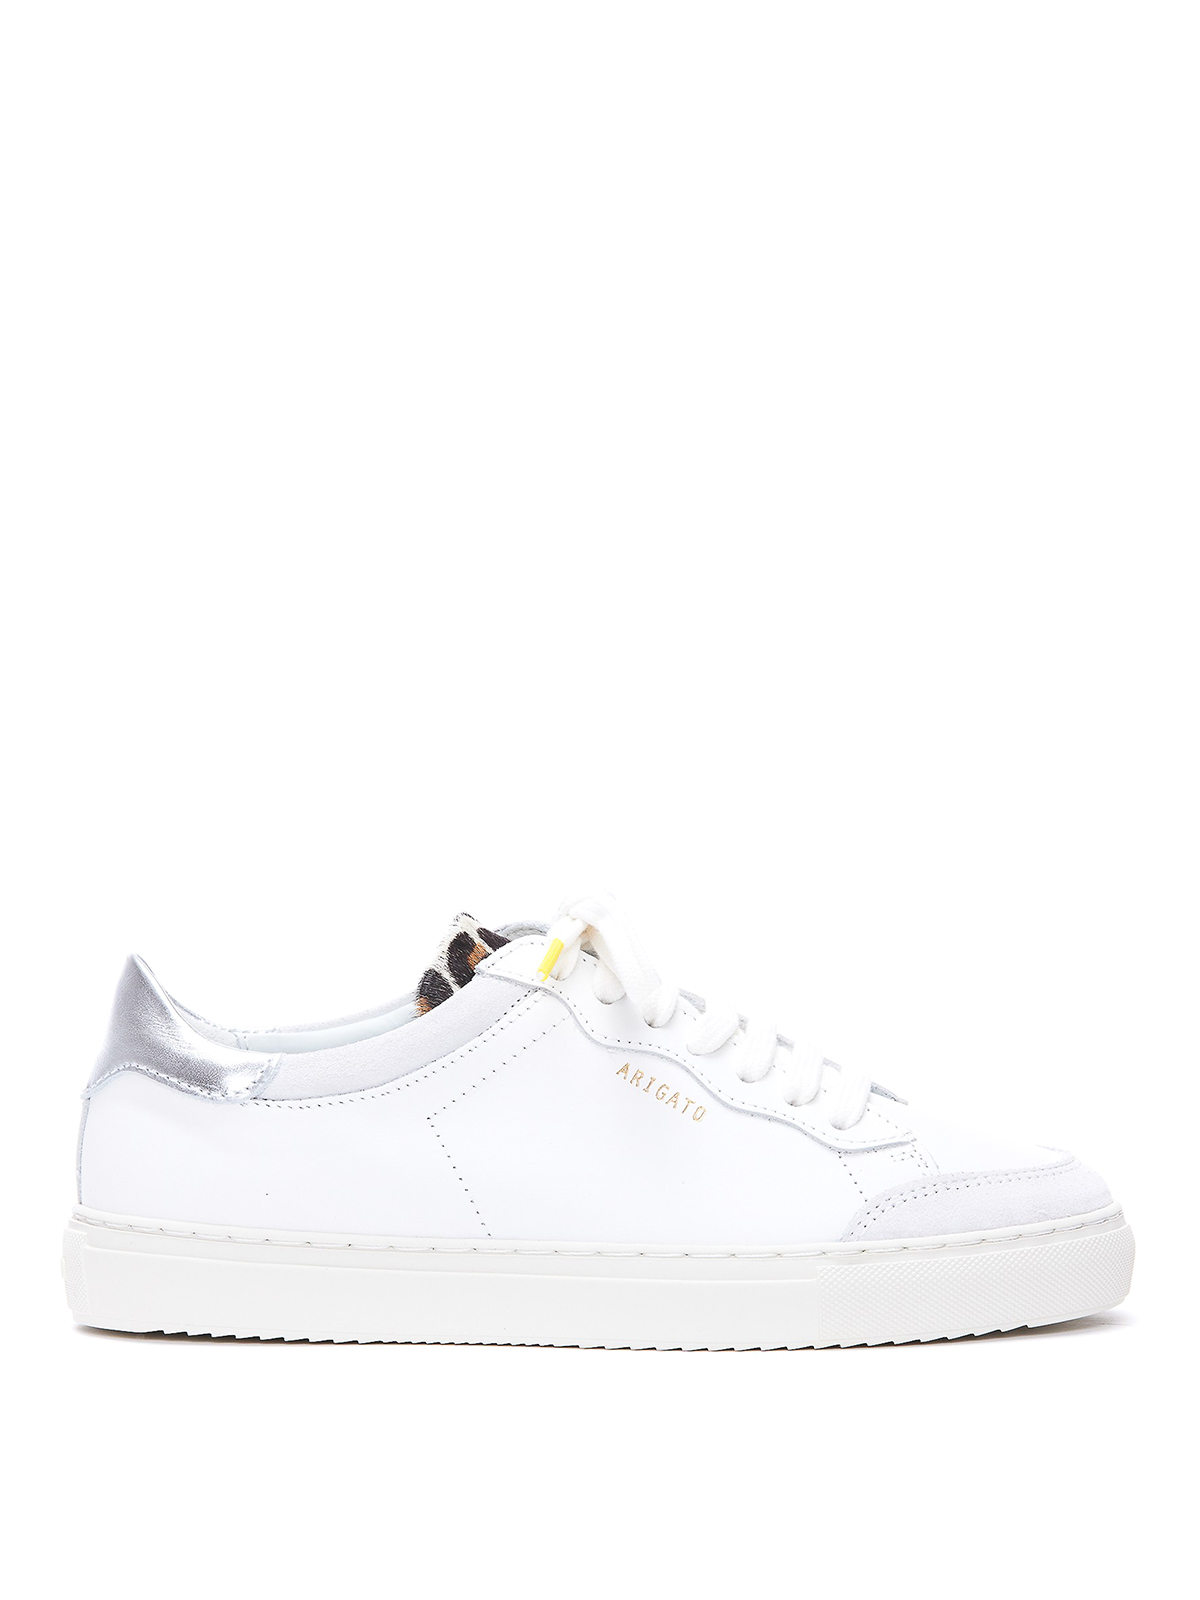 Axel Arigato Leather Sneakers In White